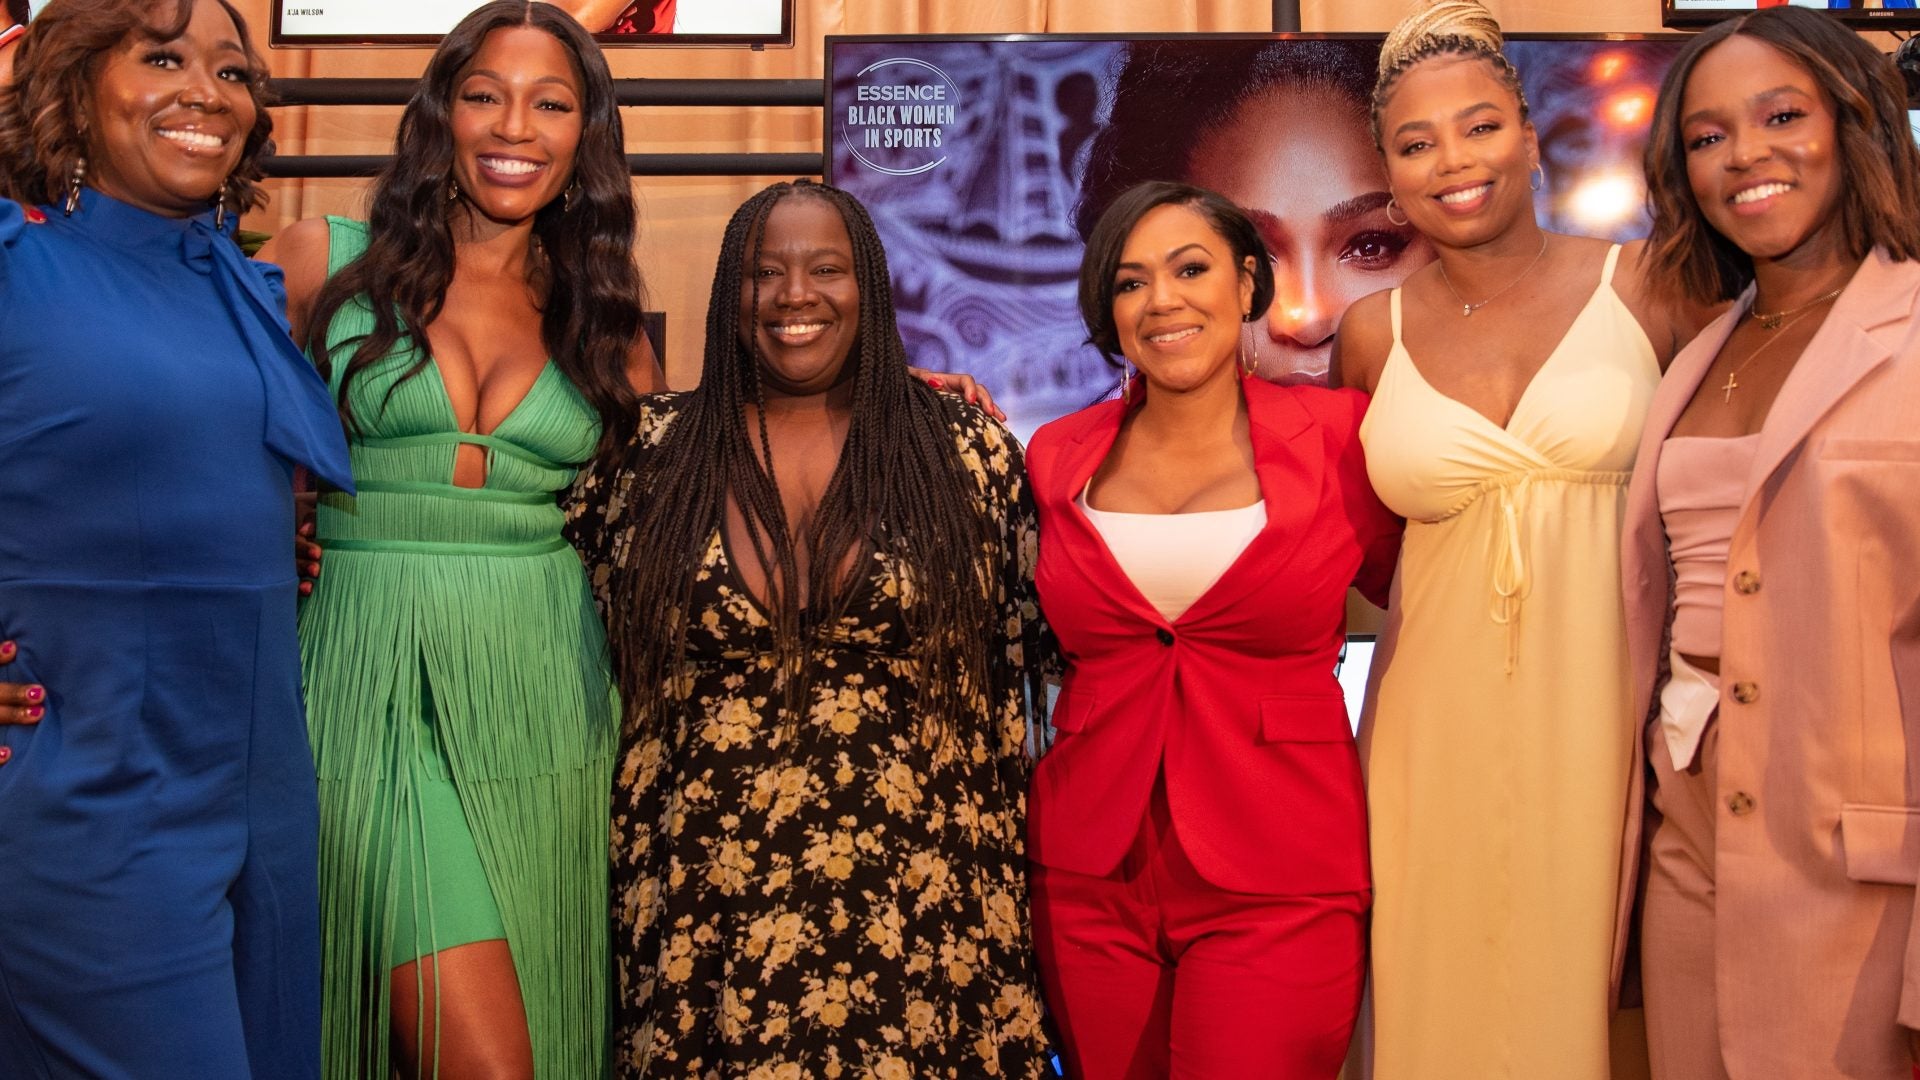 ESSENCE Black Women In Sports Honors Cari Champion, Jemele Hill And The Off The Field Players' Wives Association